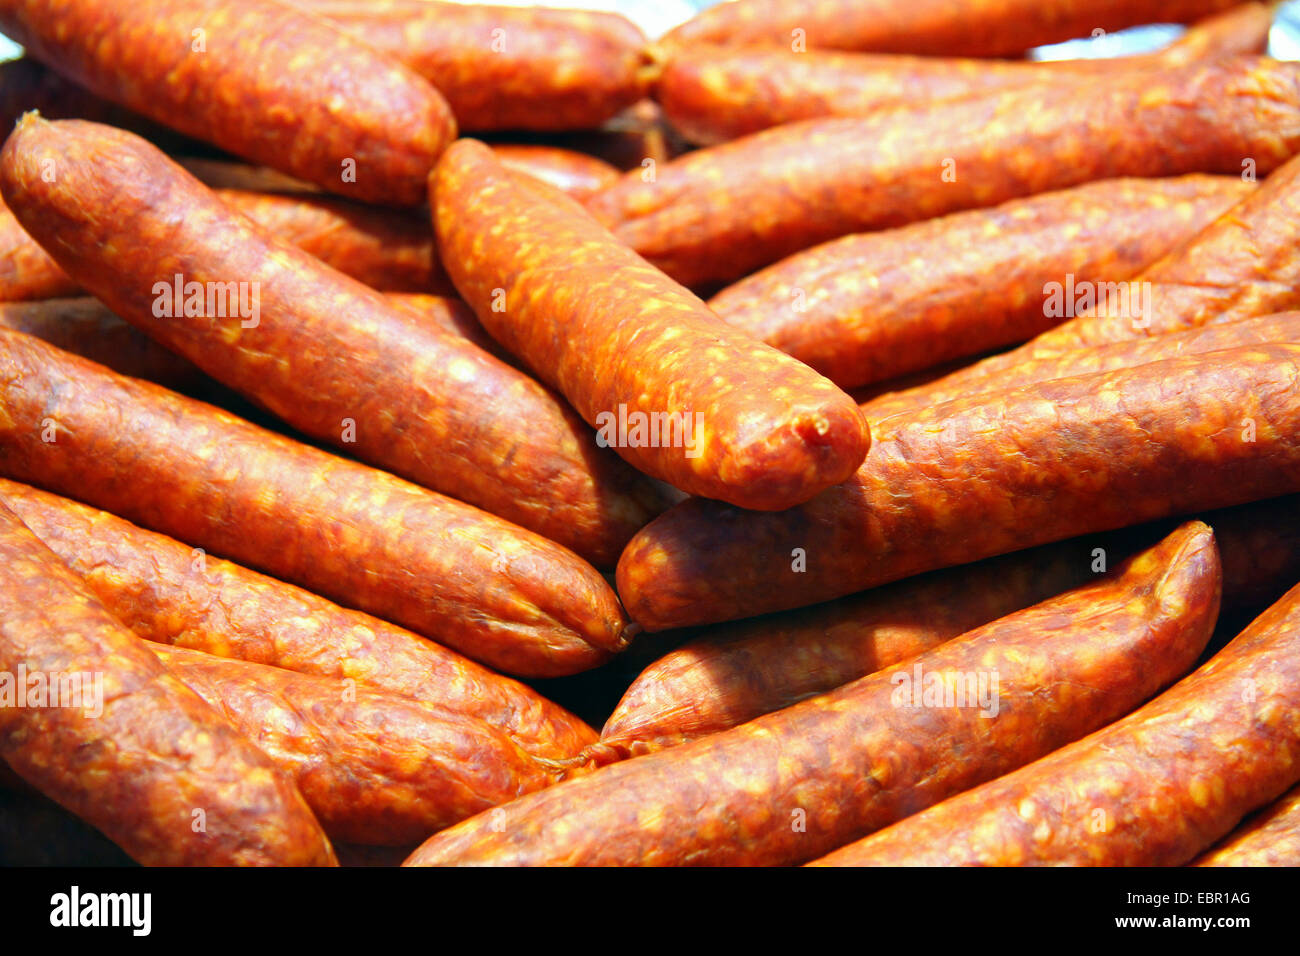 smoked Mettwurst sausages on a weekly market, Germany Stock Photo